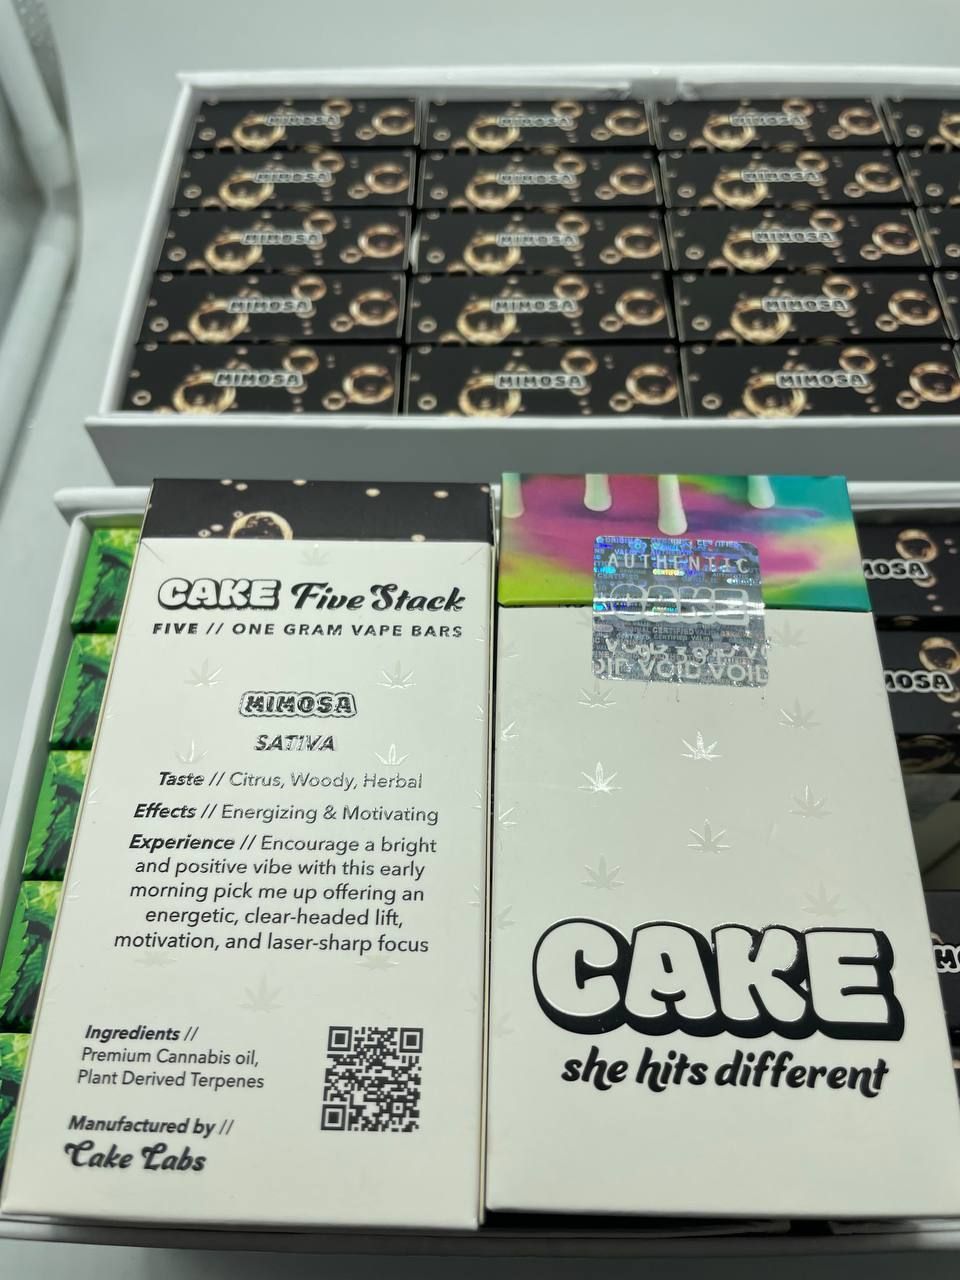 Deadly E-Cigarette “Cake Bars” being passed around teenagers